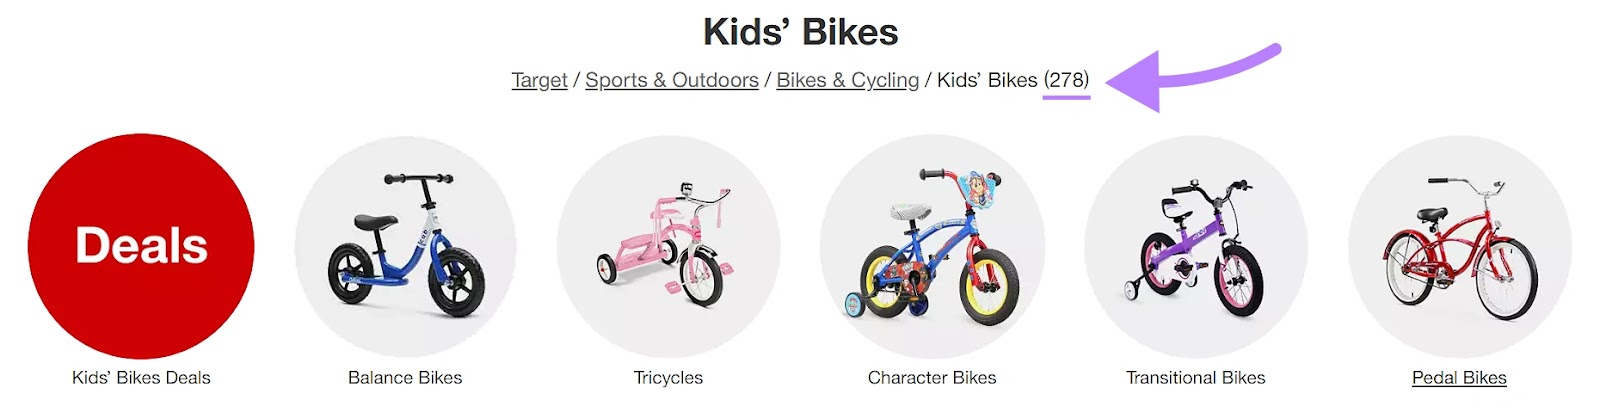 Target's breadcrumb navigation at the top of "Kids' Bikes" section